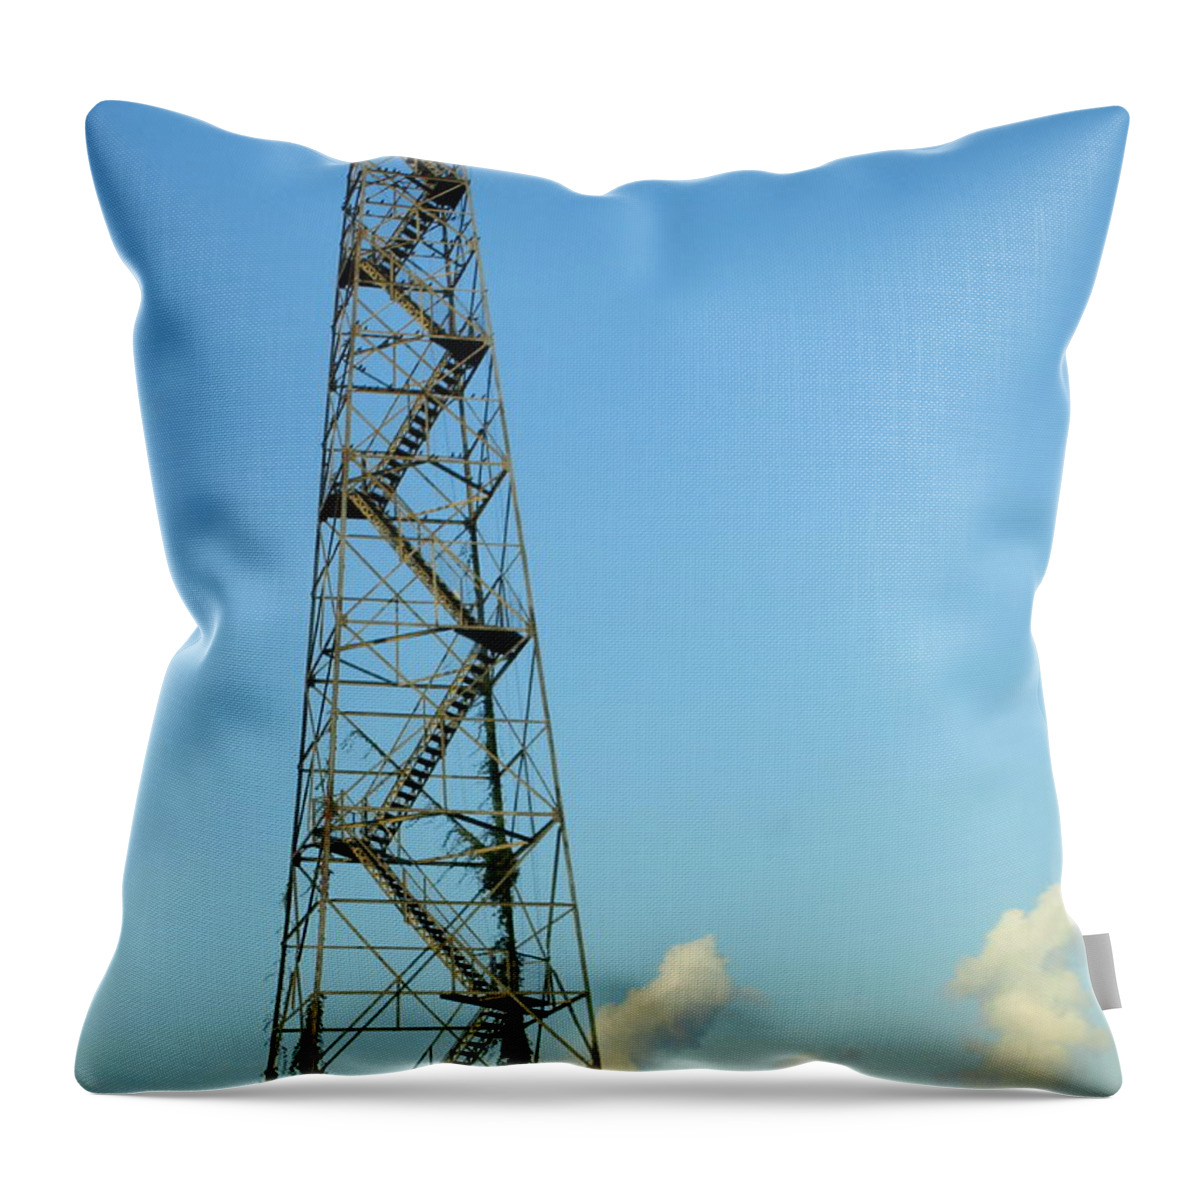 Fire Tower Throw Pillow featuring the photograph Fire Tower by Randall Weidner